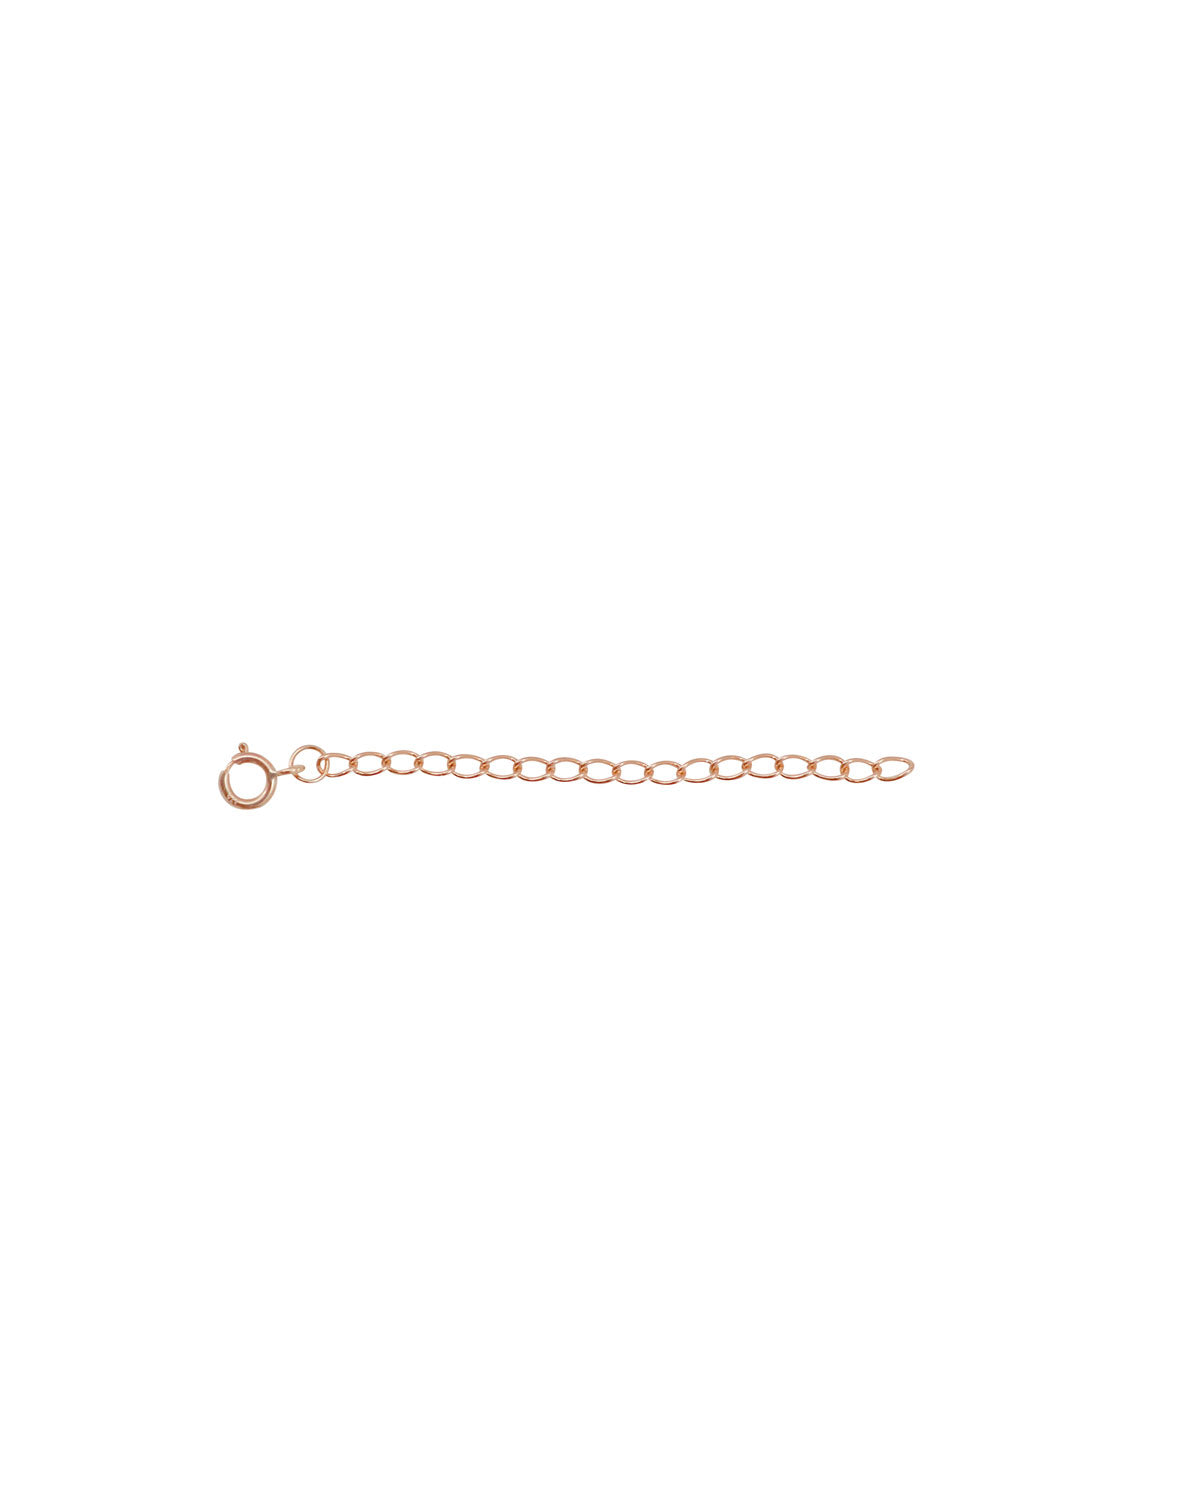 Necklace Chain Extender